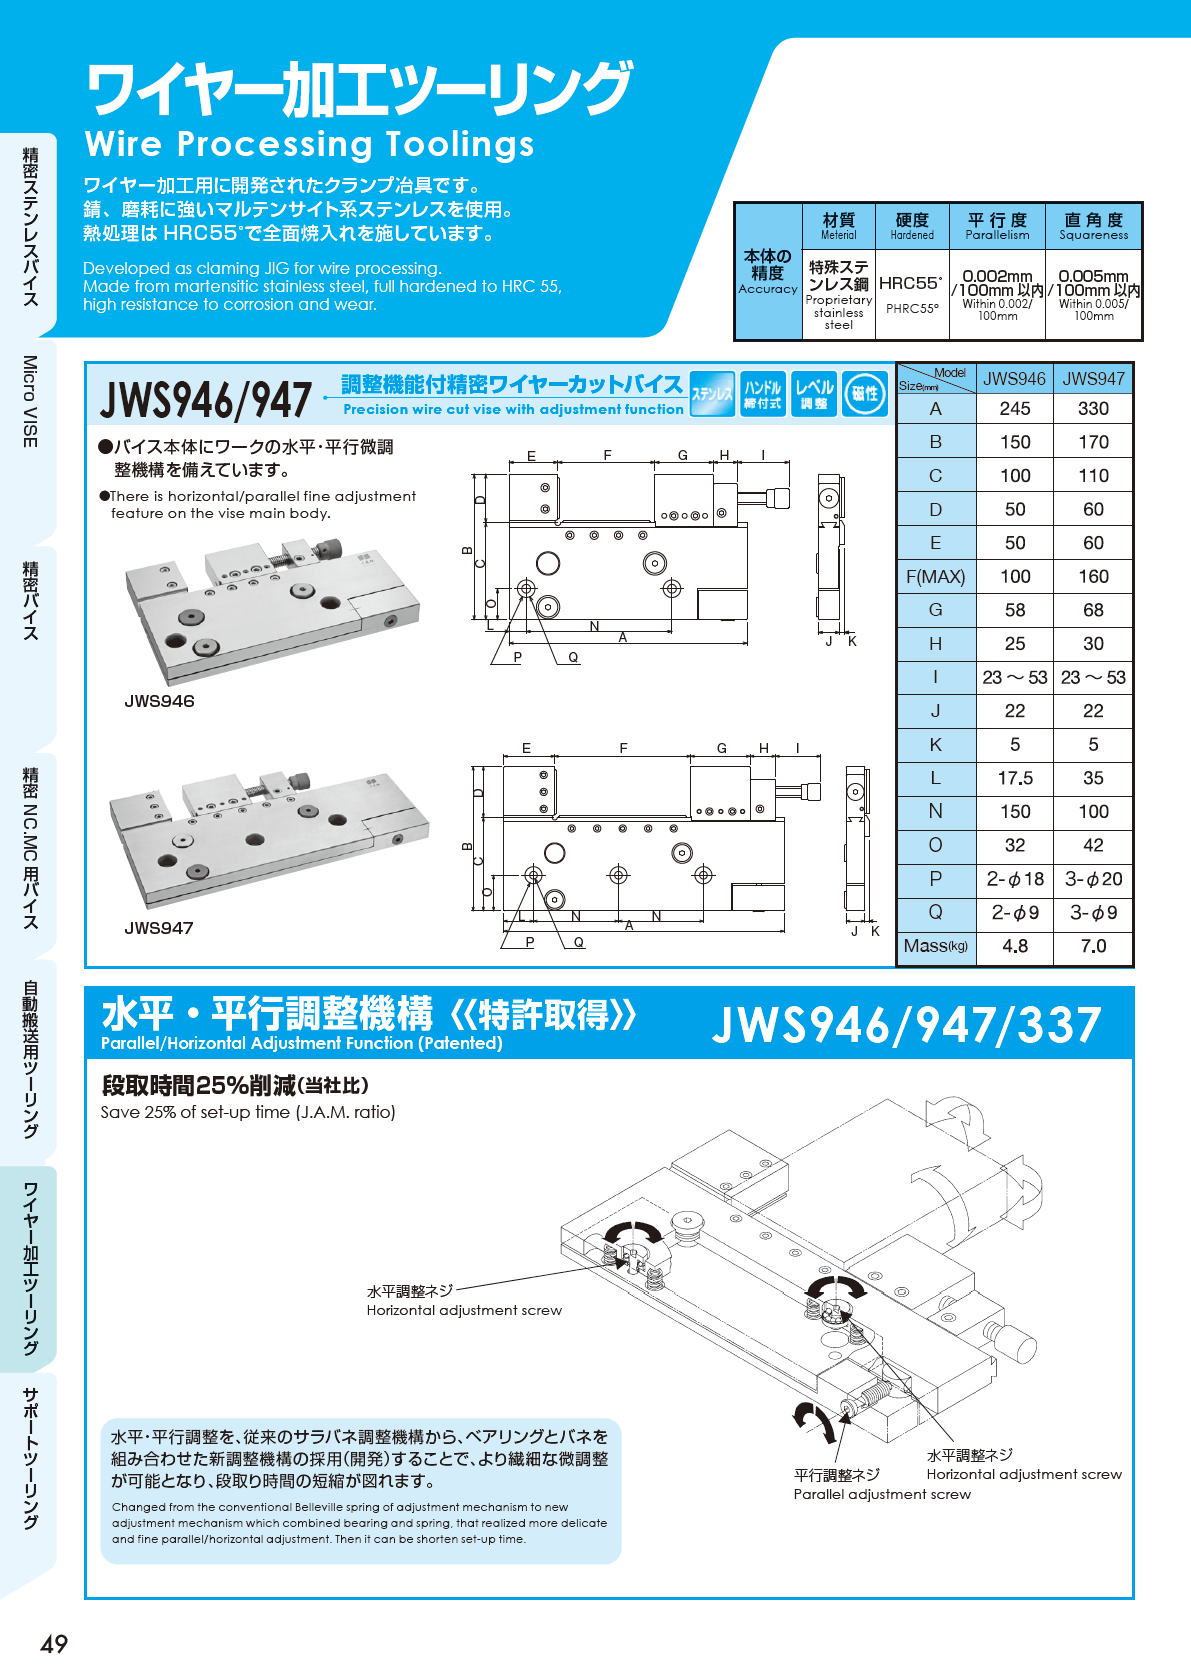 J.A.M,日本オートマチックマシン ワイヤー加工ツーリング　Precision wire cut vise with adjustment function